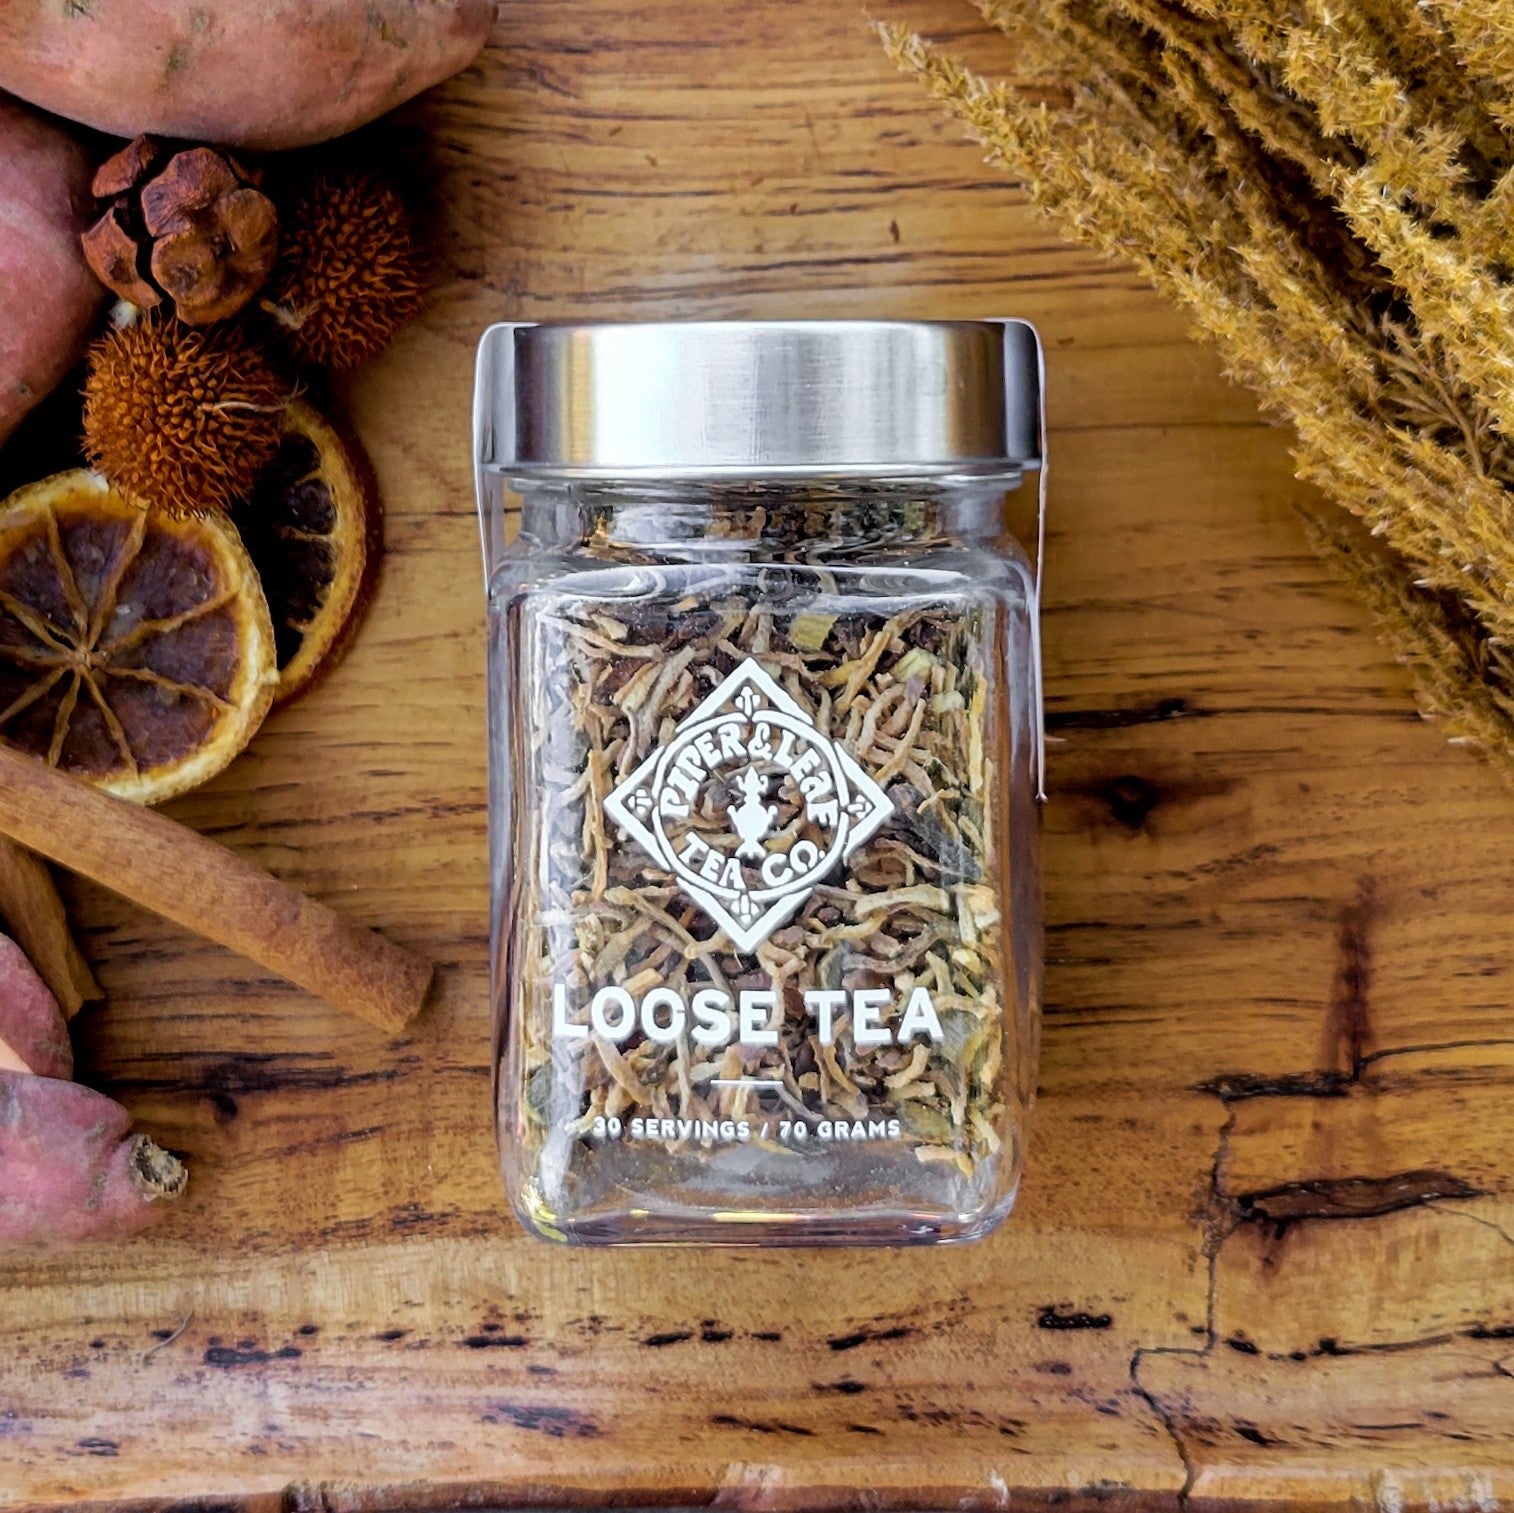 A Sweetie Pie Chai Glass Jar of Loose Leaf Tea - 30 Servings by Piper & Leaf Tea Co. on a wooden table.